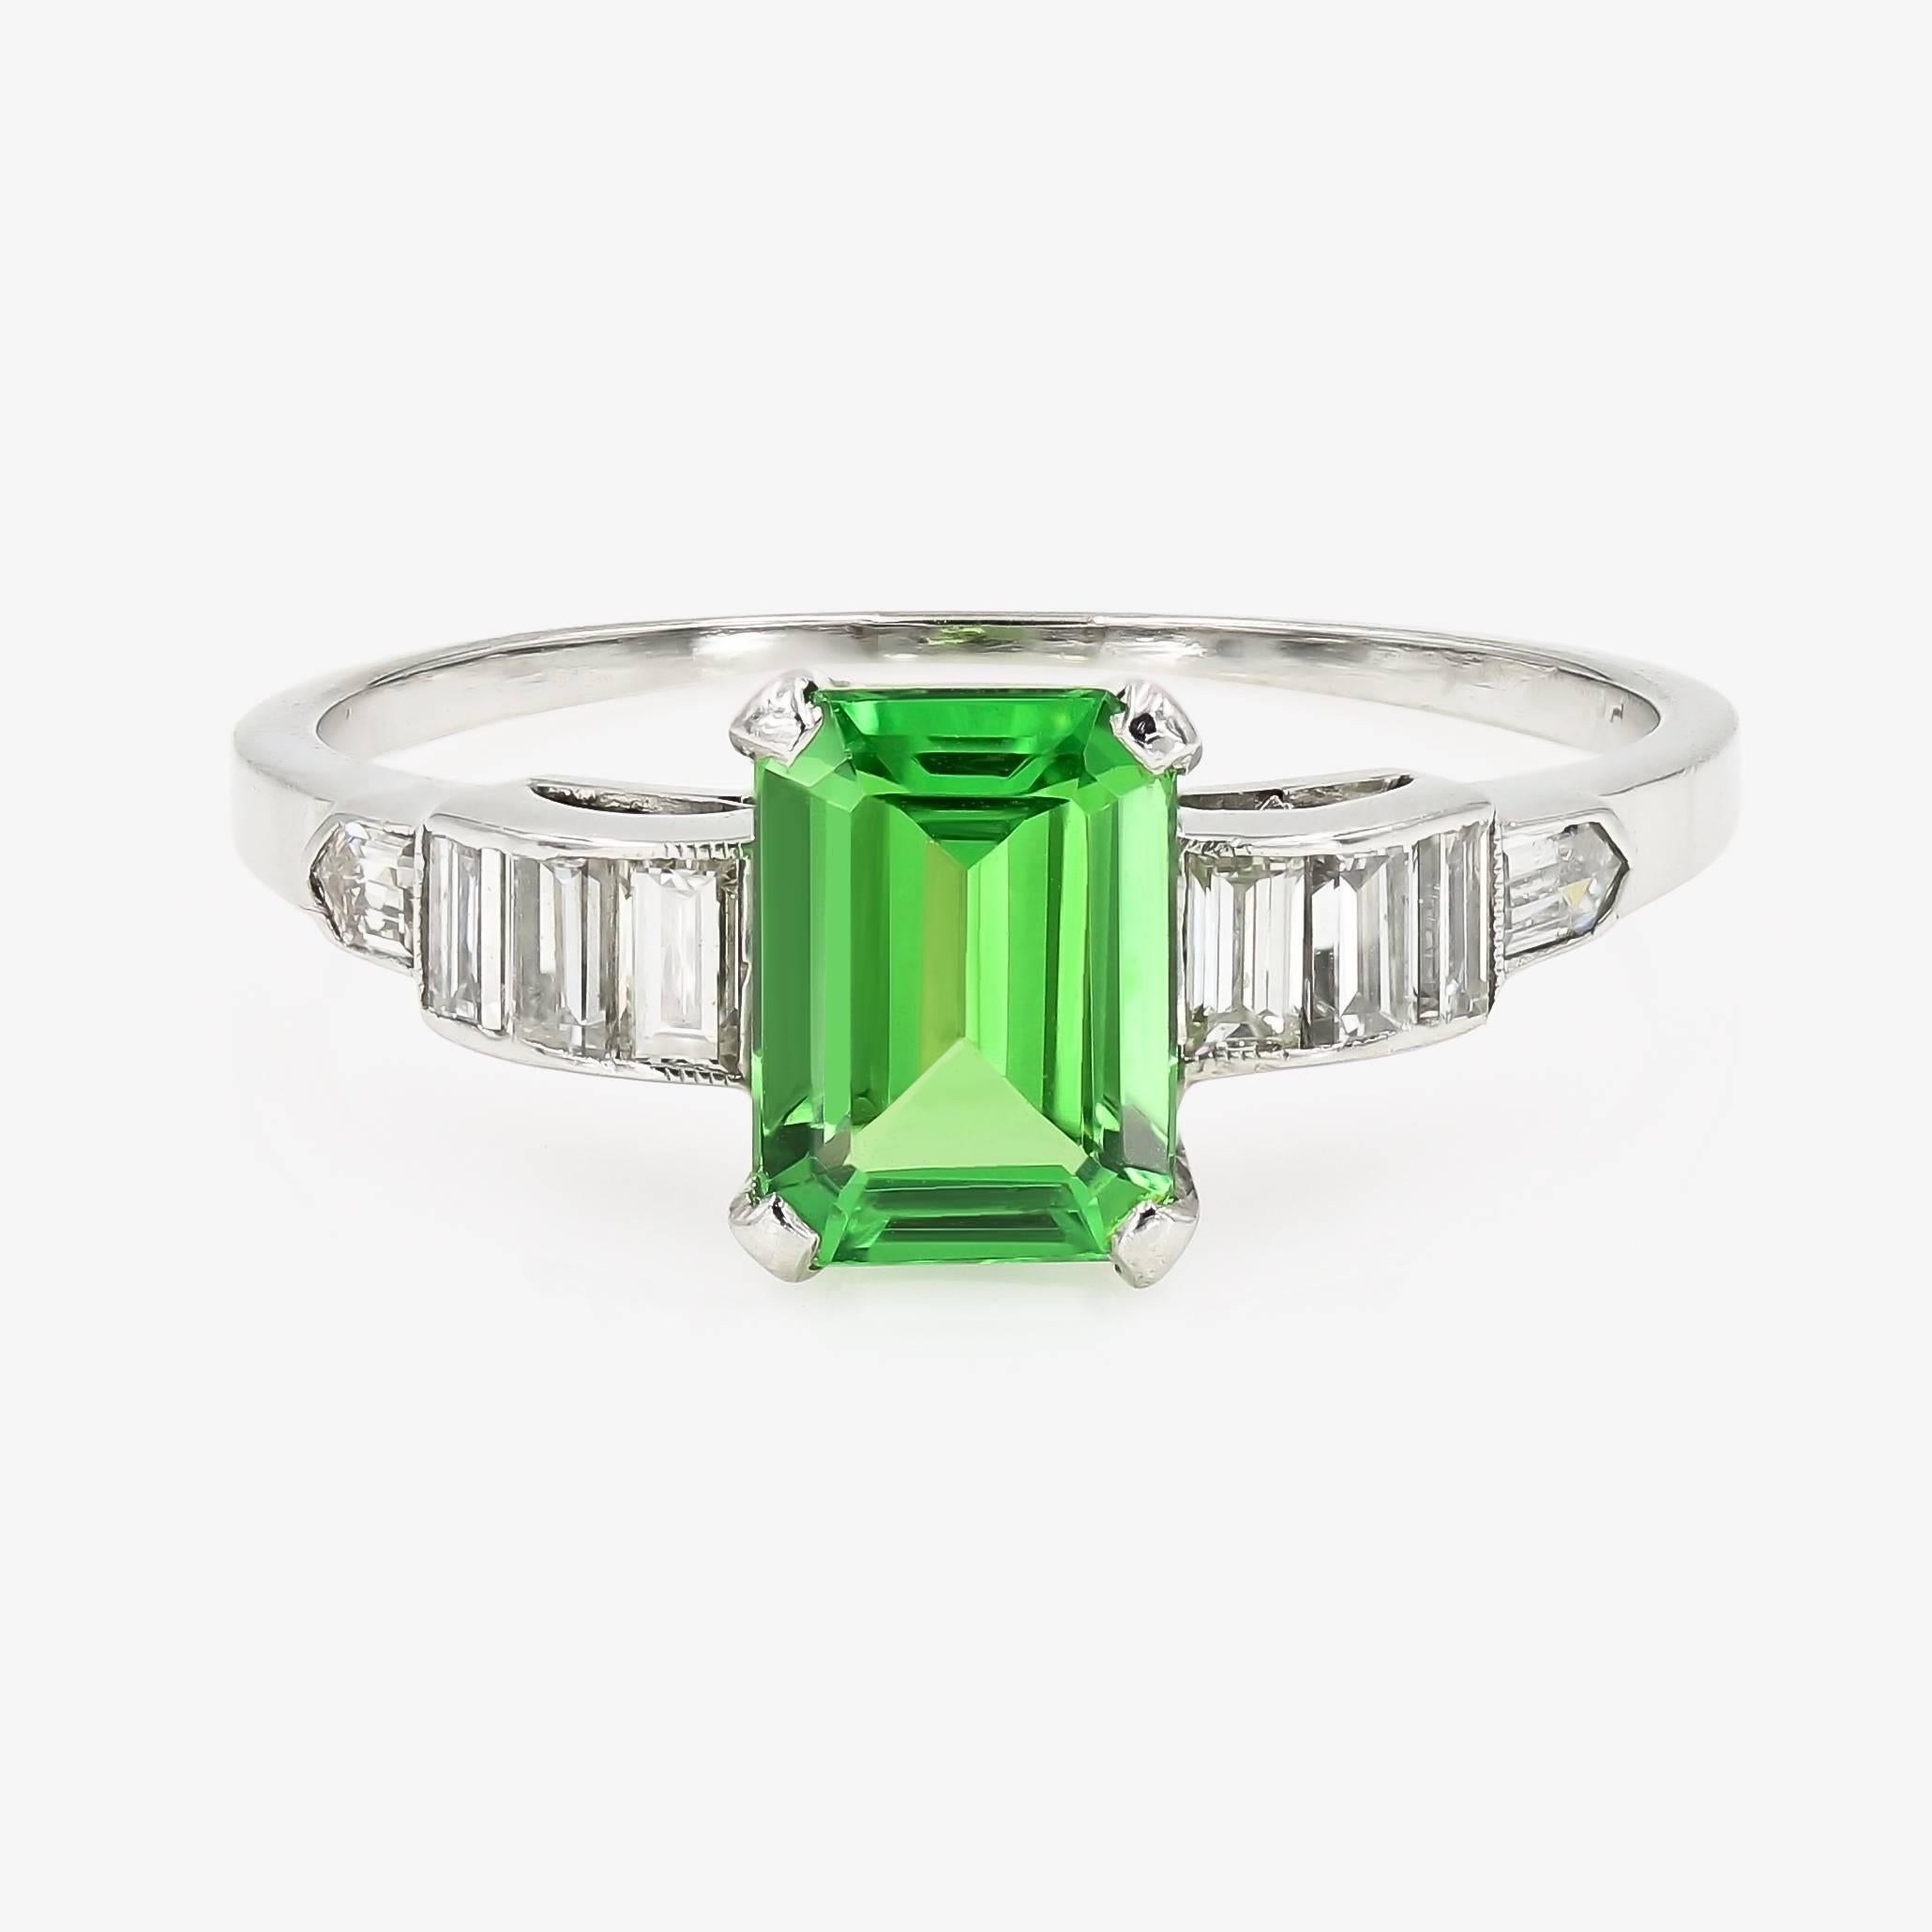 This rich green emerald cut natural Tsavorite is 1.22cts. with 8 baguette diamonds down the sides of the shank= .43ct. t.w. (G color and VVS-VS in clarity) The Tsavorite is from Kenya, and measures 7.6x5.4mm. The entire ring is made in